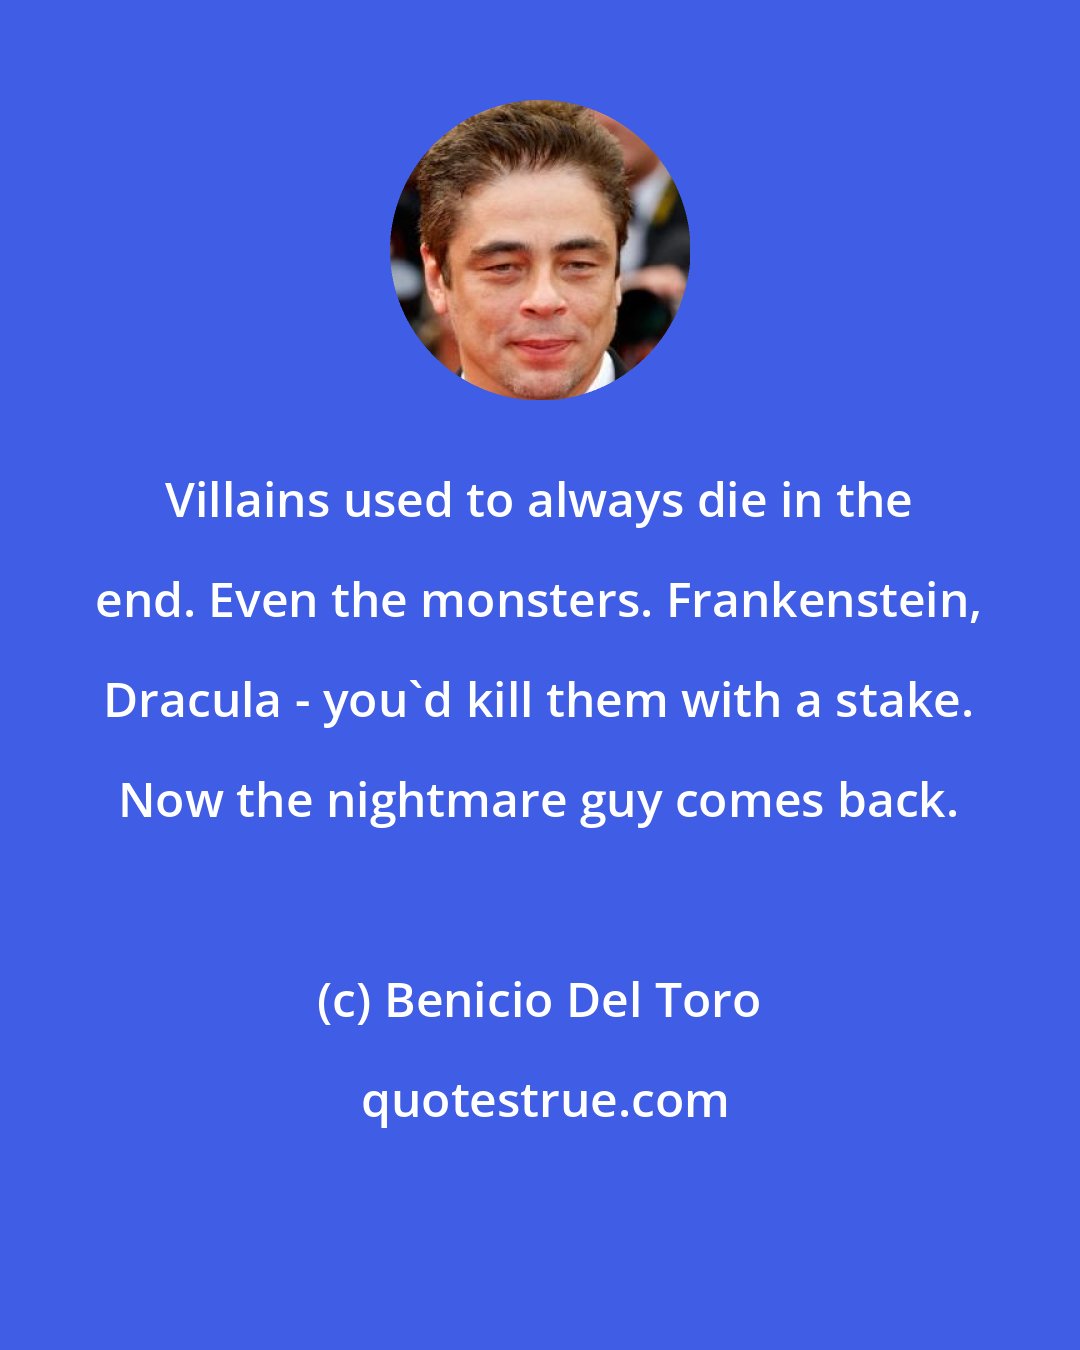 Benicio Del Toro: Villains used to always die in the end. Even the monsters. Frankenstein, Dracula - you'd kill them with a stake. Now the nightmare guy comes back.